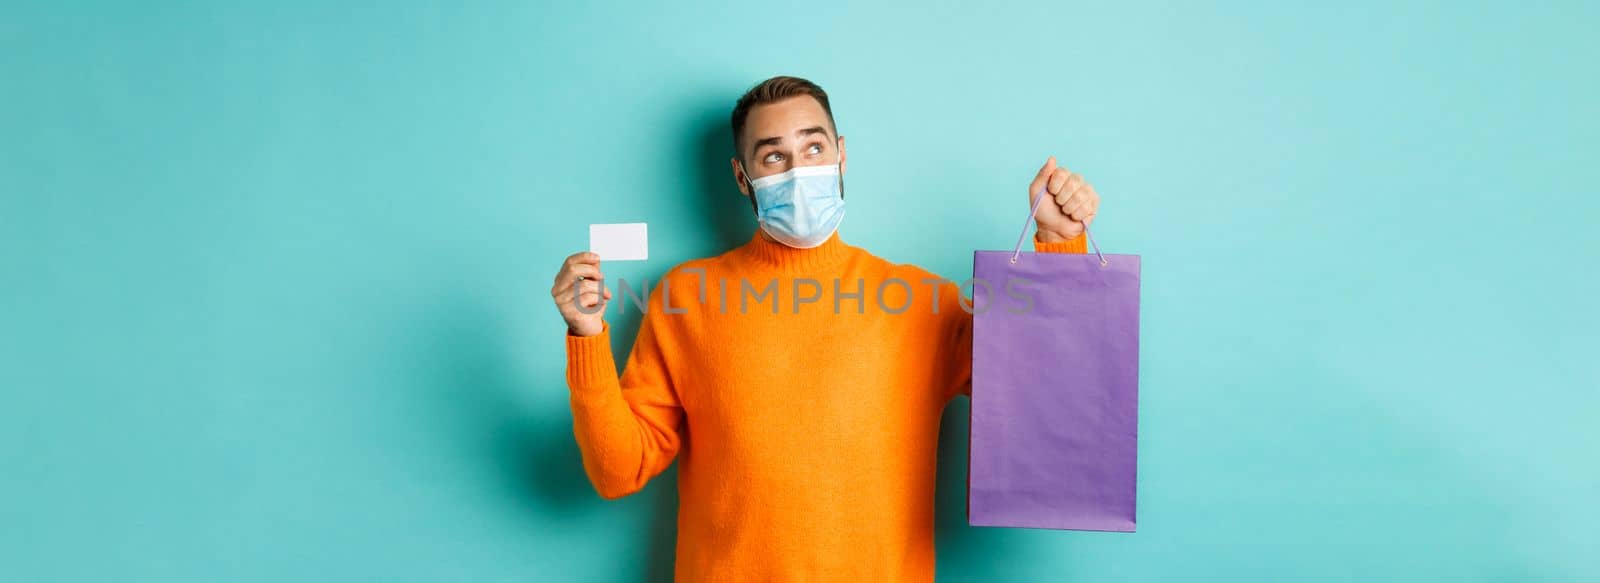 Covid-19, pandemic and lifestyle concept. Thoughtful man in face mask, holding purple shopping bag and credit card, thinking or imaging, standing over turquoise background.